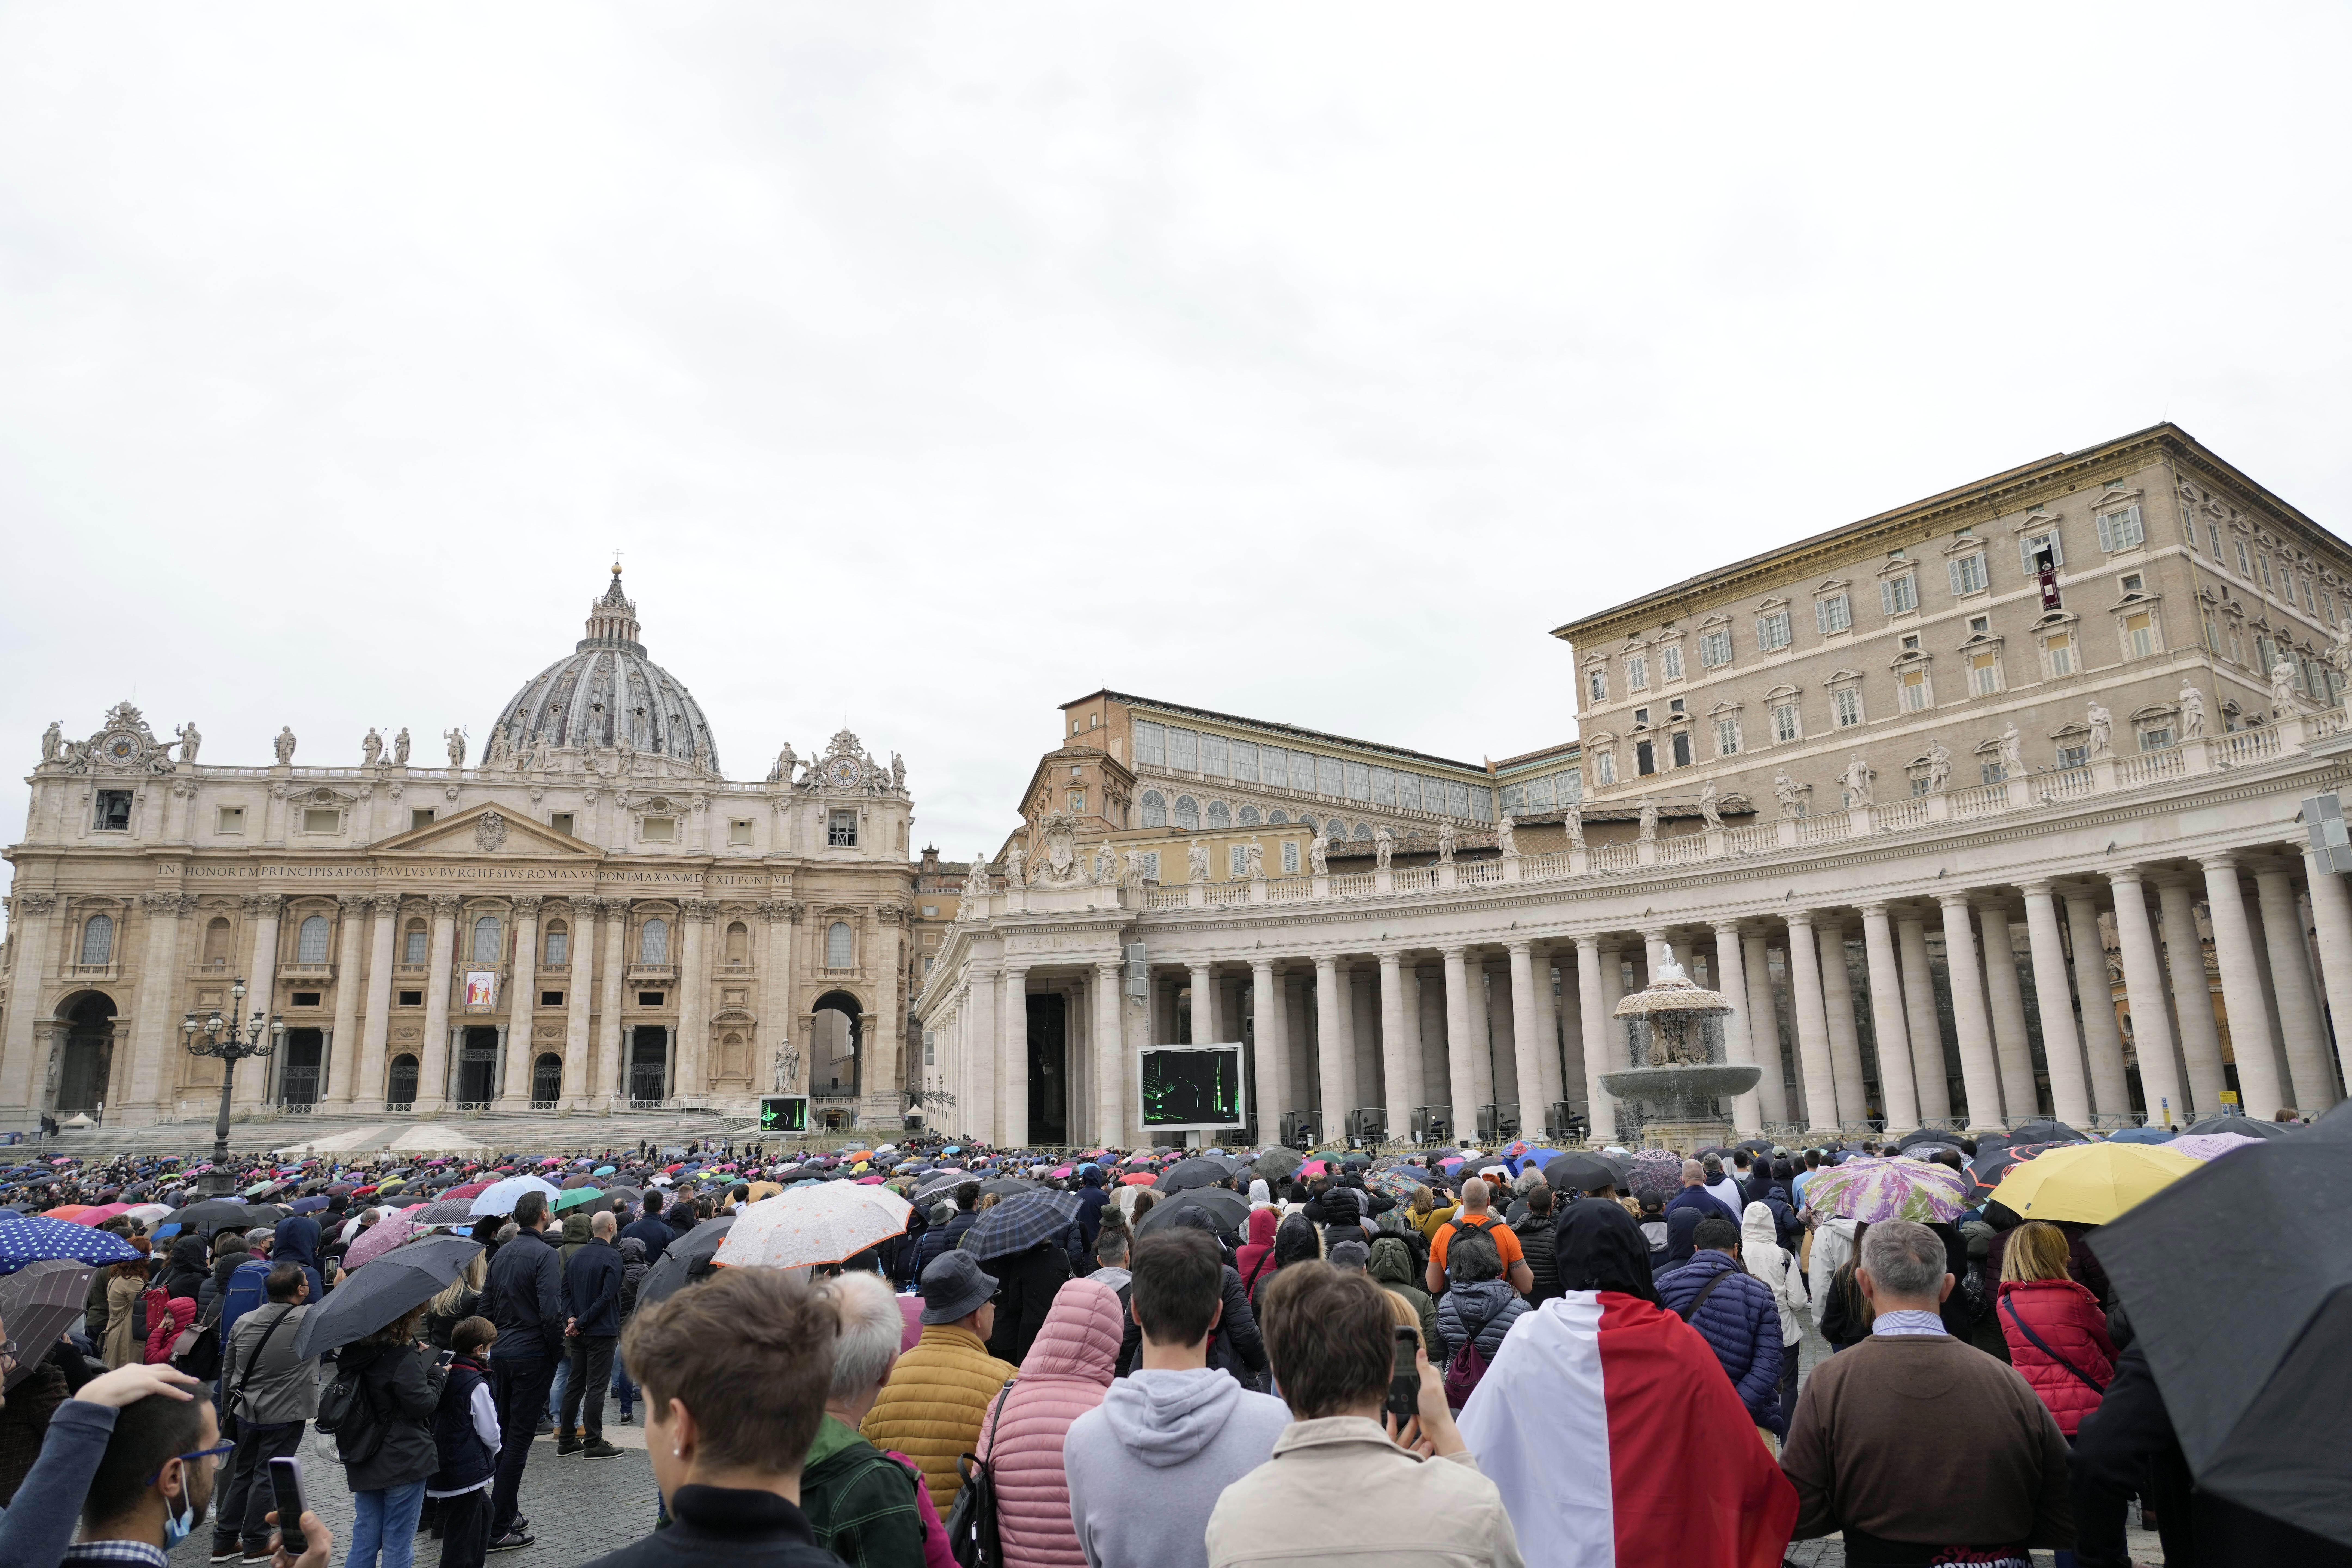 Faithful gather to listen to Pope Francis' Angelus noon prayer in St. Peter's Square, at the Vatican, Sunday, Nov. 14, 2021. (AP Photo/Gregorio Borgia, File)